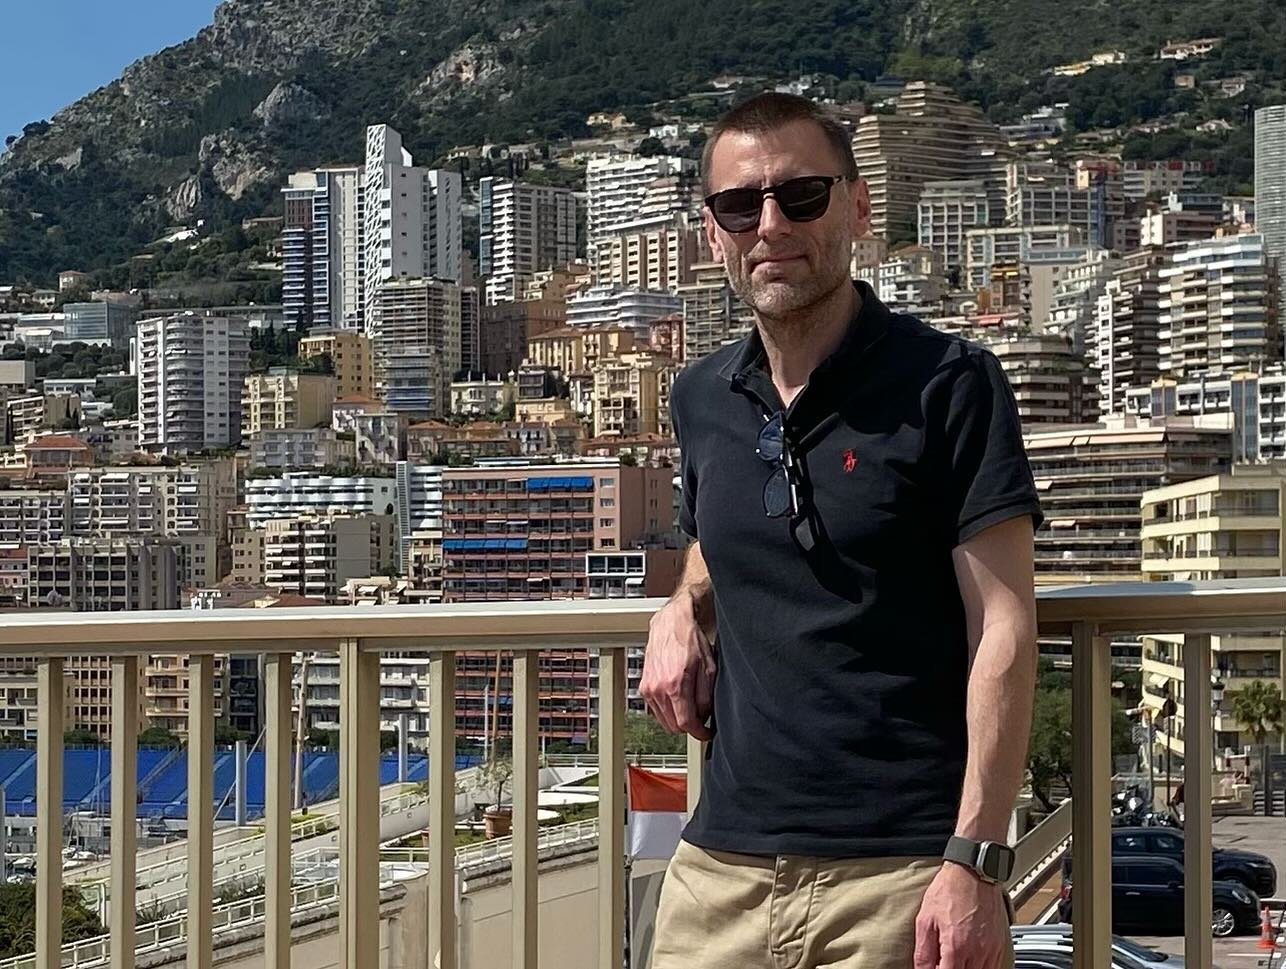 Holiday break on Cote D&rsquo;Azur - Nice, Antibes, Biot, Saint-Jean-Cap-Ferrat and Monaco 🇲🇨 (a quick visit). Good weather and great food. It was sunny, mostly!